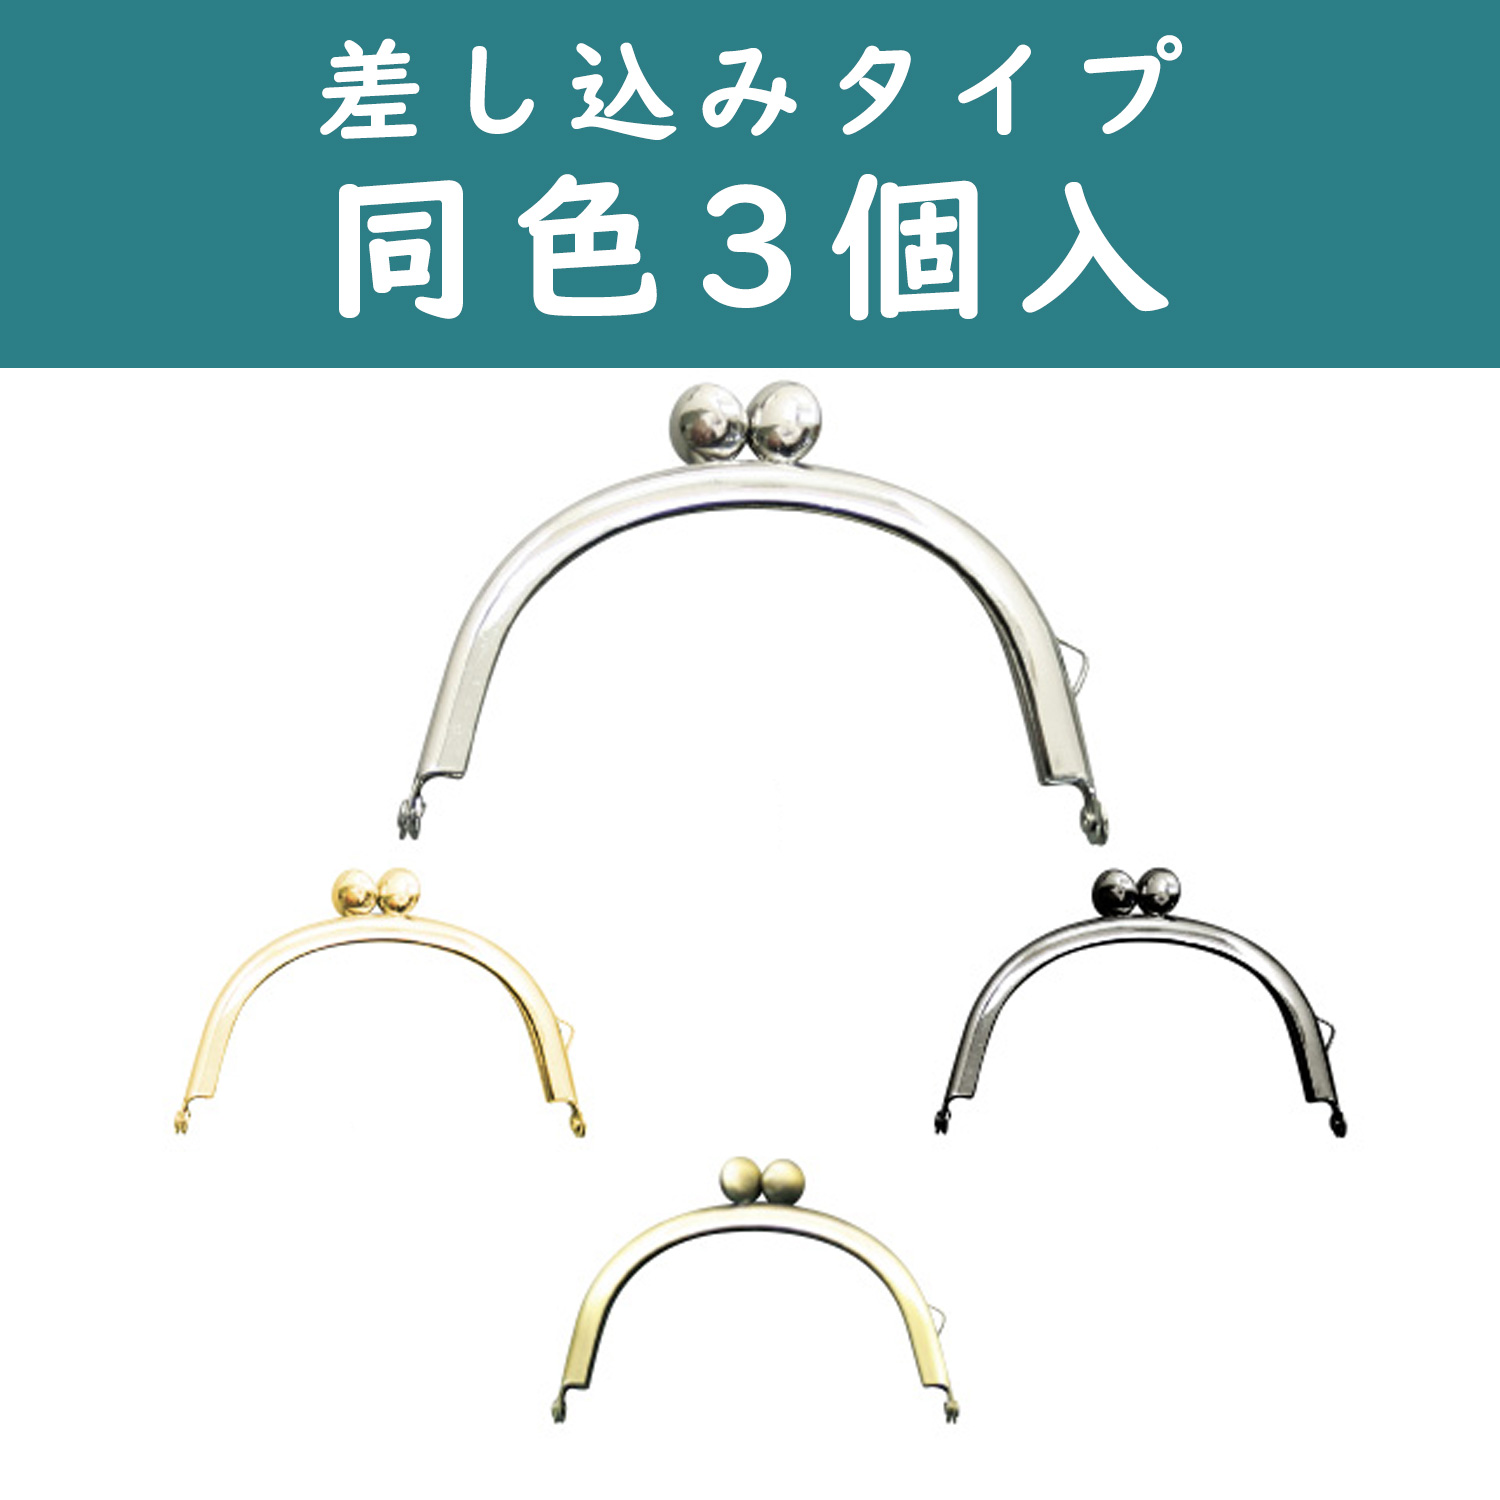 SKW3 Purse Frame, with one loop, 3pcs (pcs)